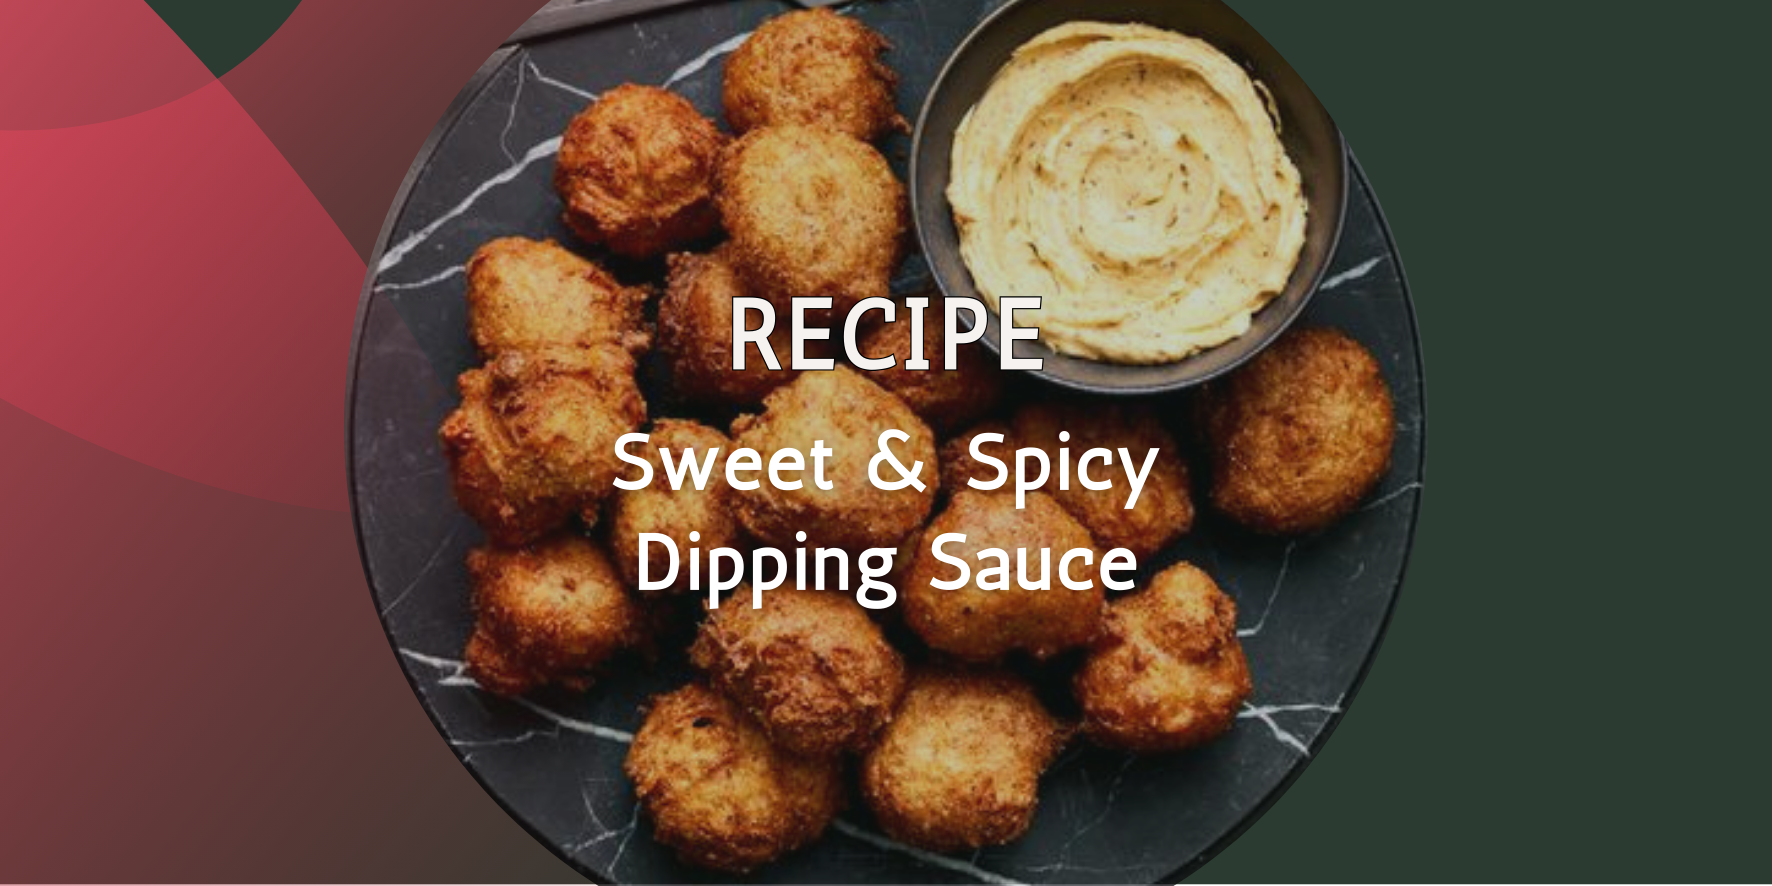 Sweet & Spicy Dipping Sauce Recipe